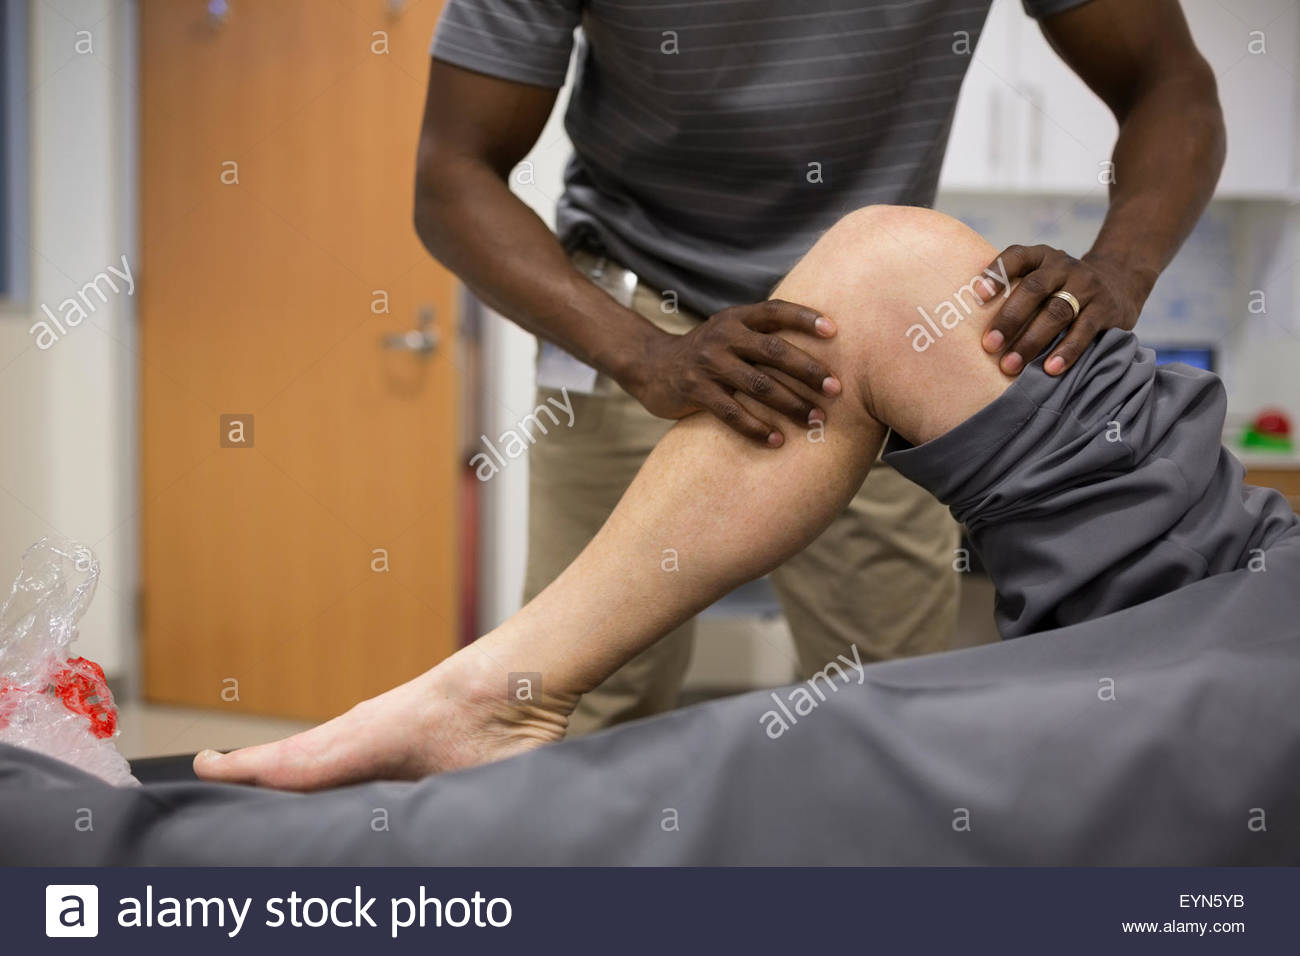 Physical therapist stretching patient knee Stock Photo